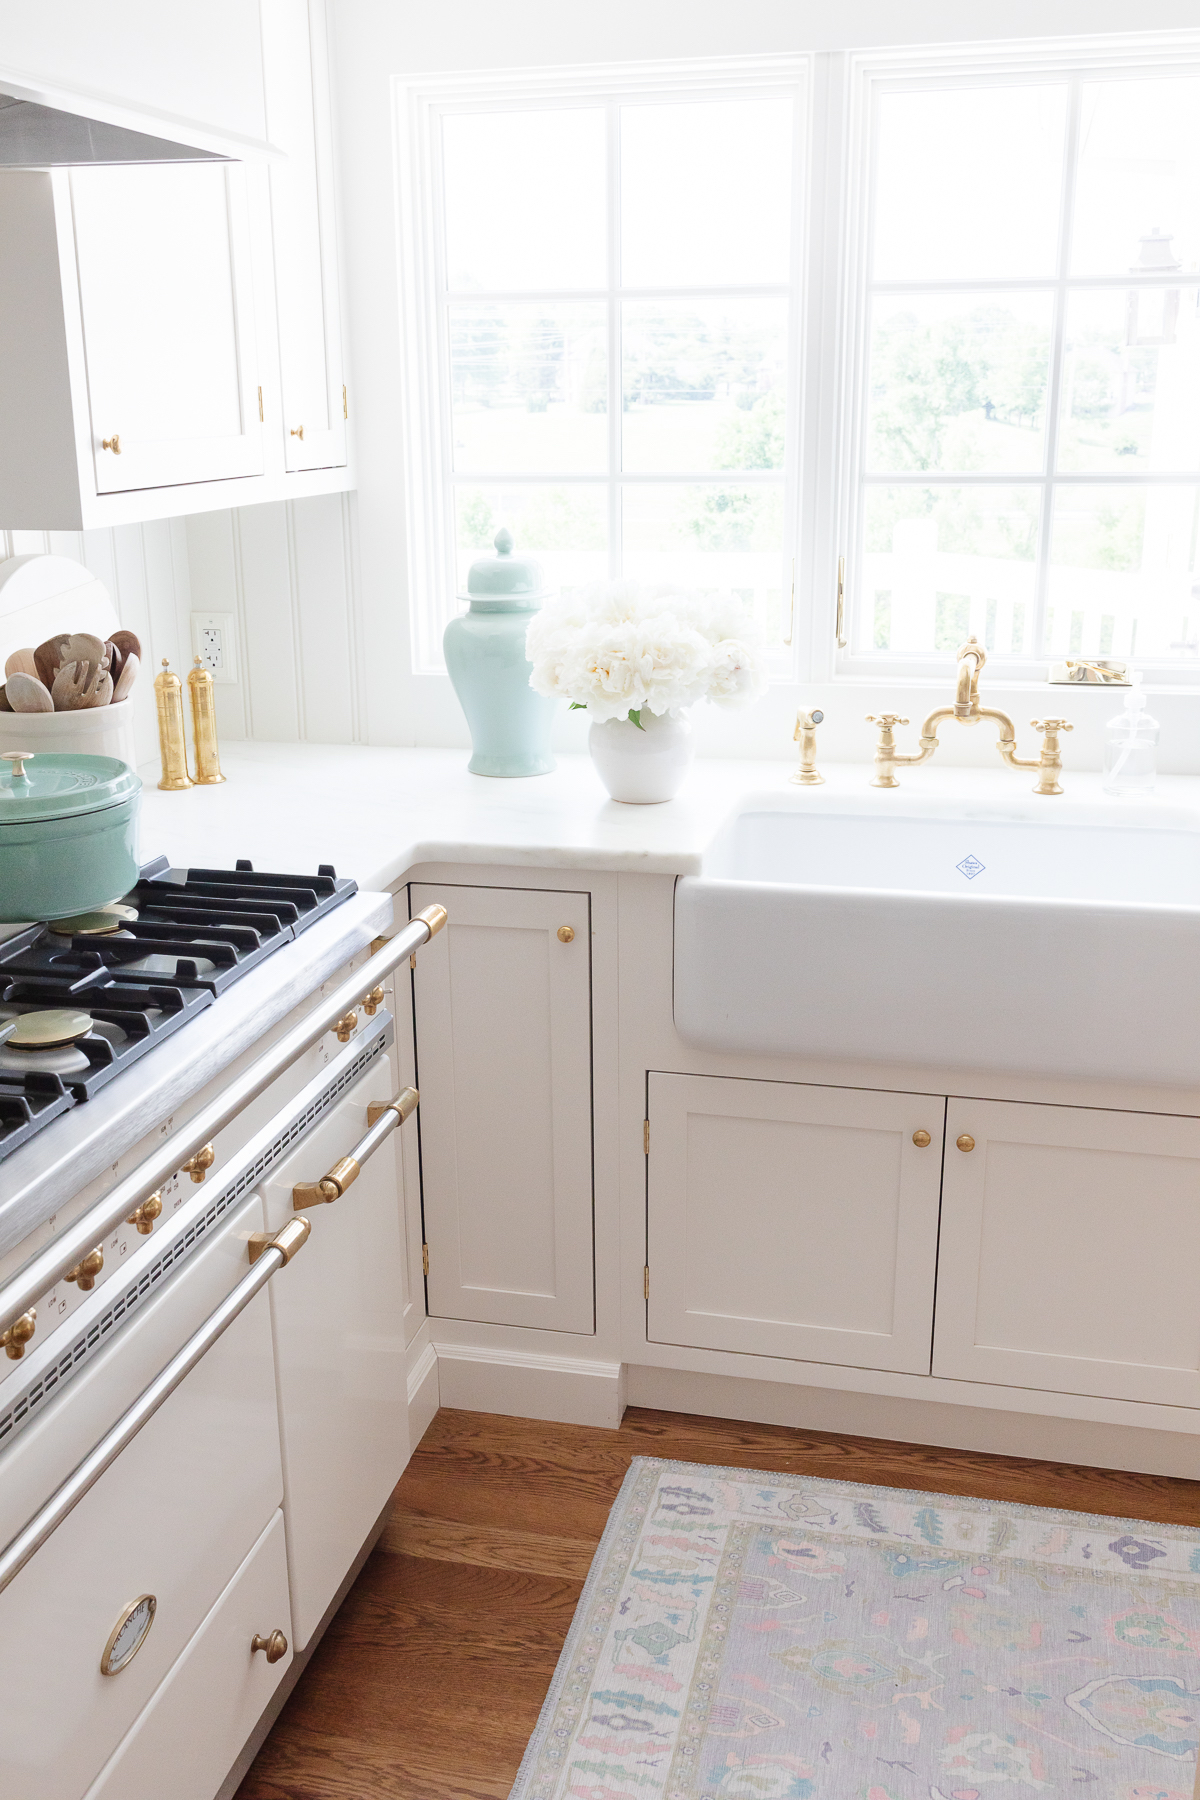 A bright kitchen with white cabinets, a farmhouse sink, gold fixtures, a stove with brass accents, and a window. Decorative items include a vase with flowers and a pastel blue ceramic jar.